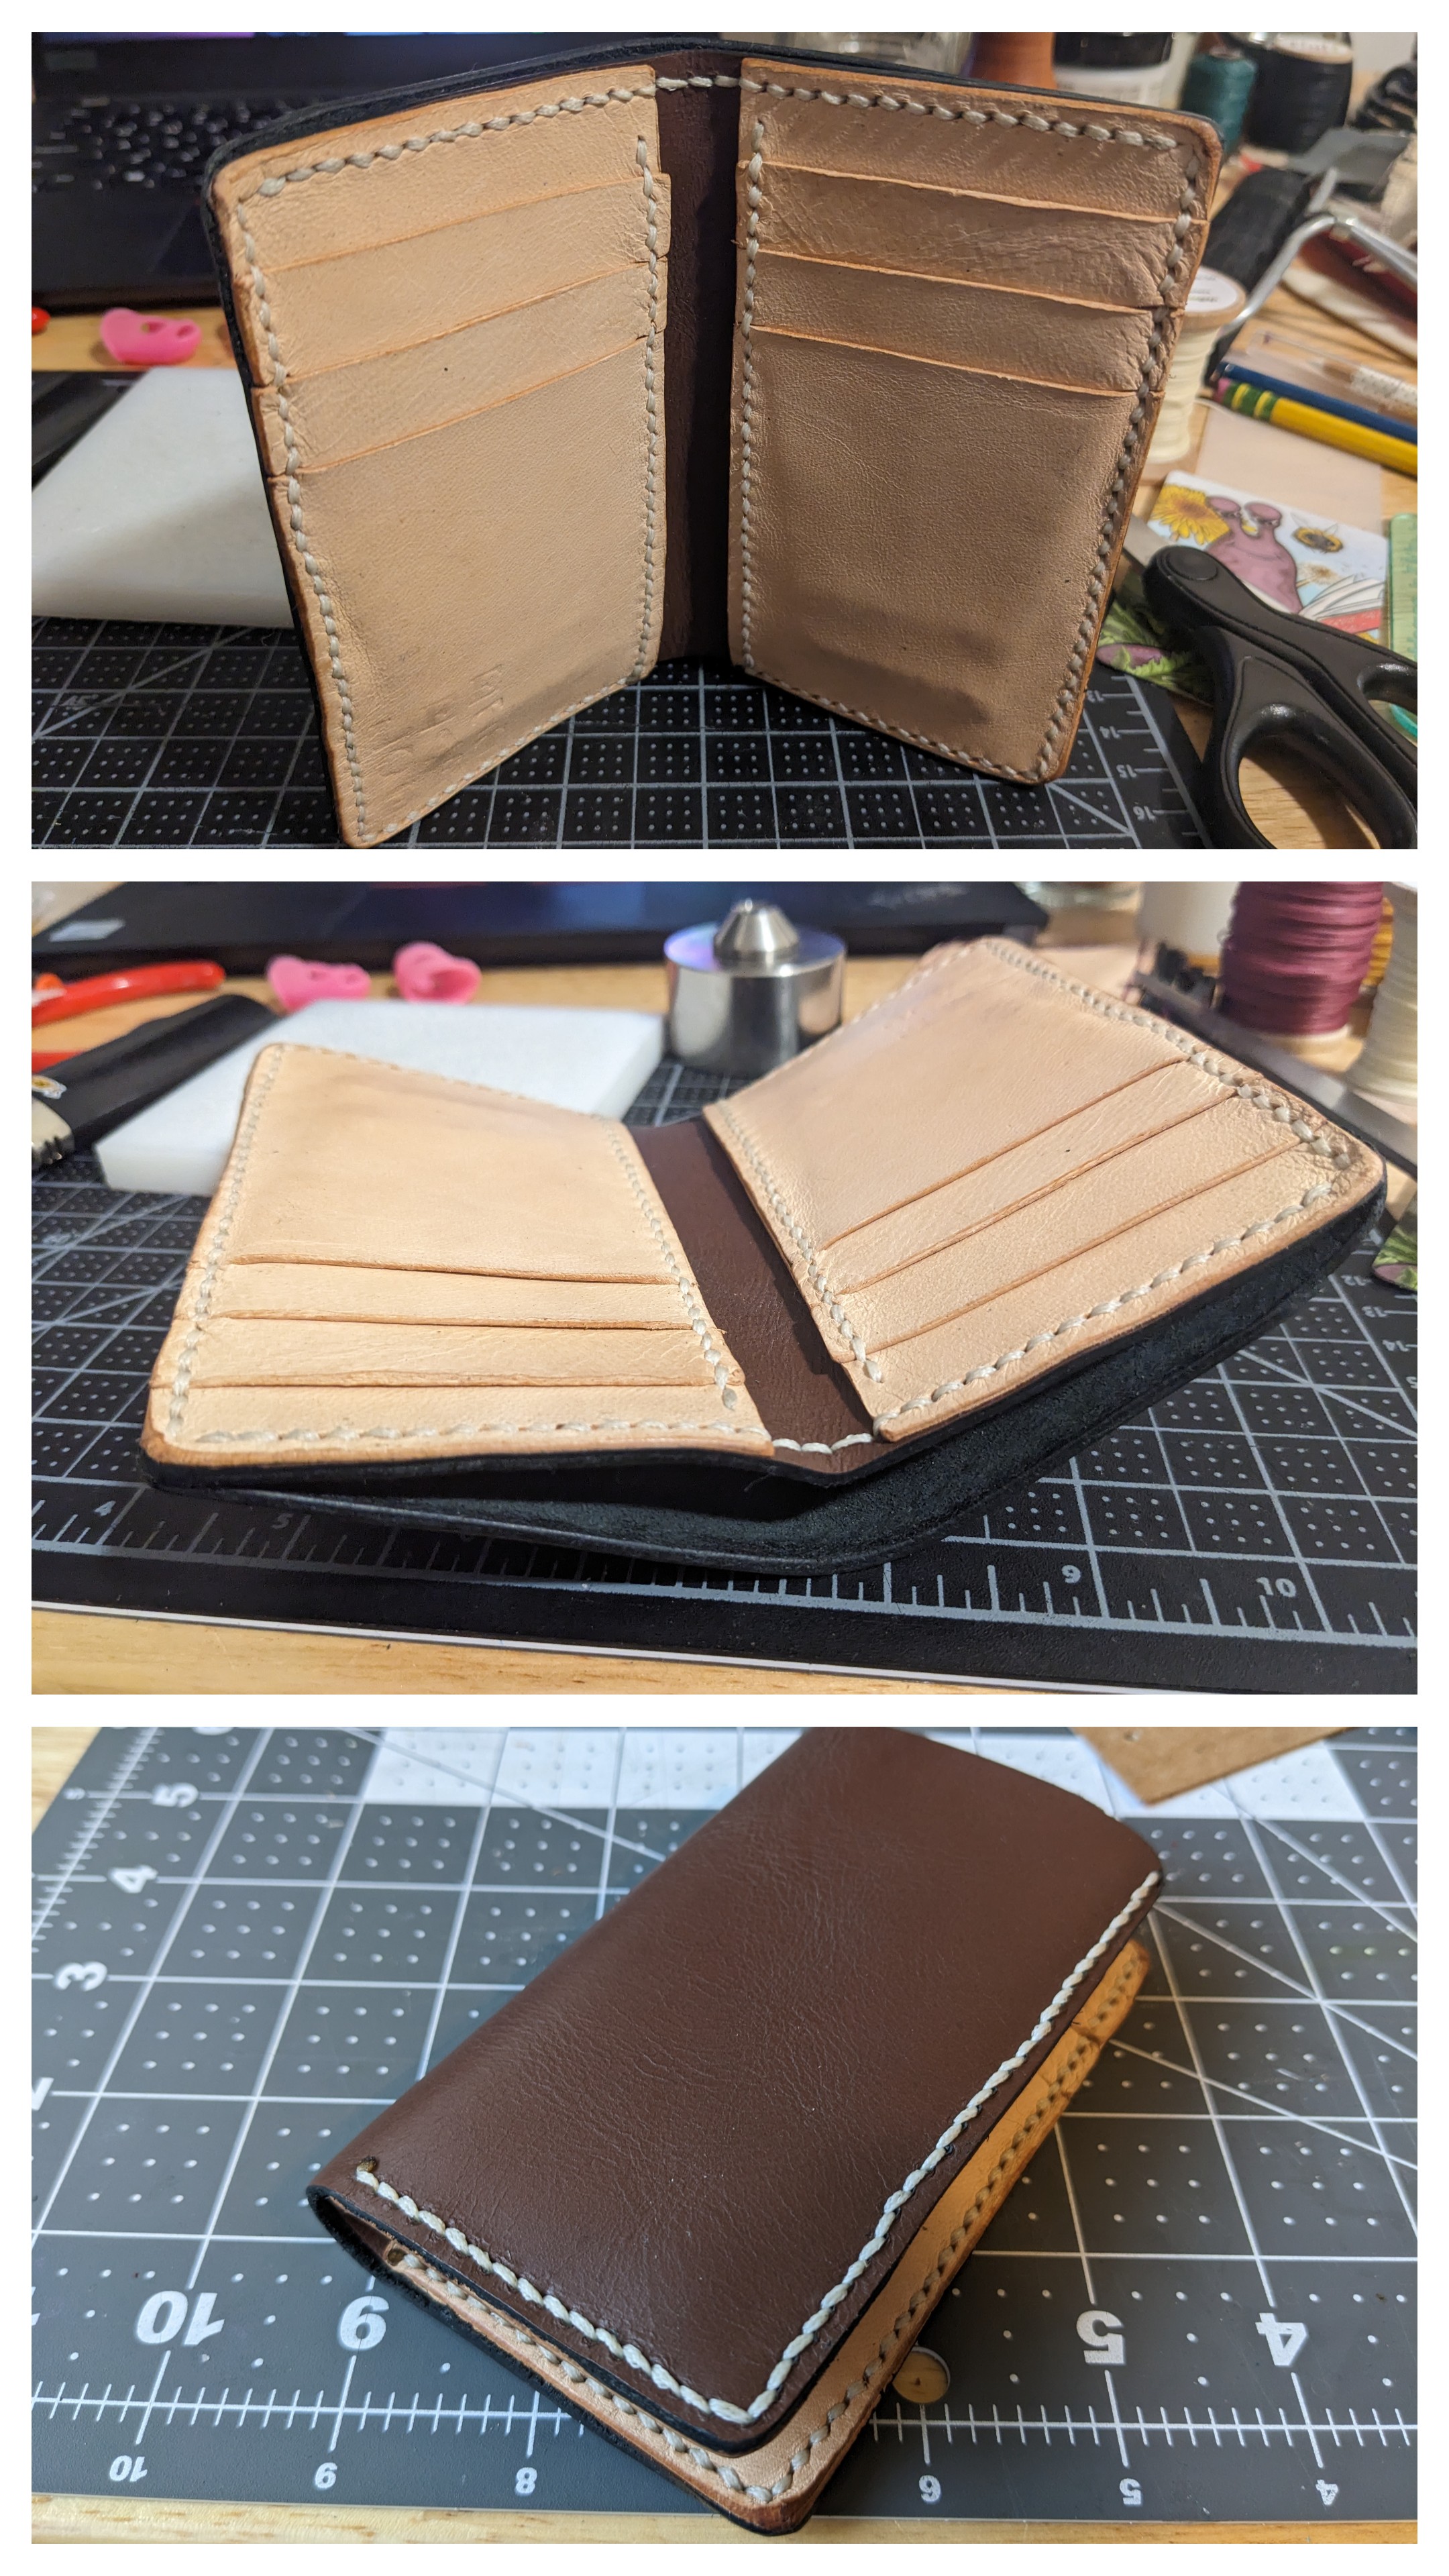 A collage showing a hand-stitched leather vertical bifold wallet with 6 card pockets, 2 hidden pockets, and 1 bill pocket.